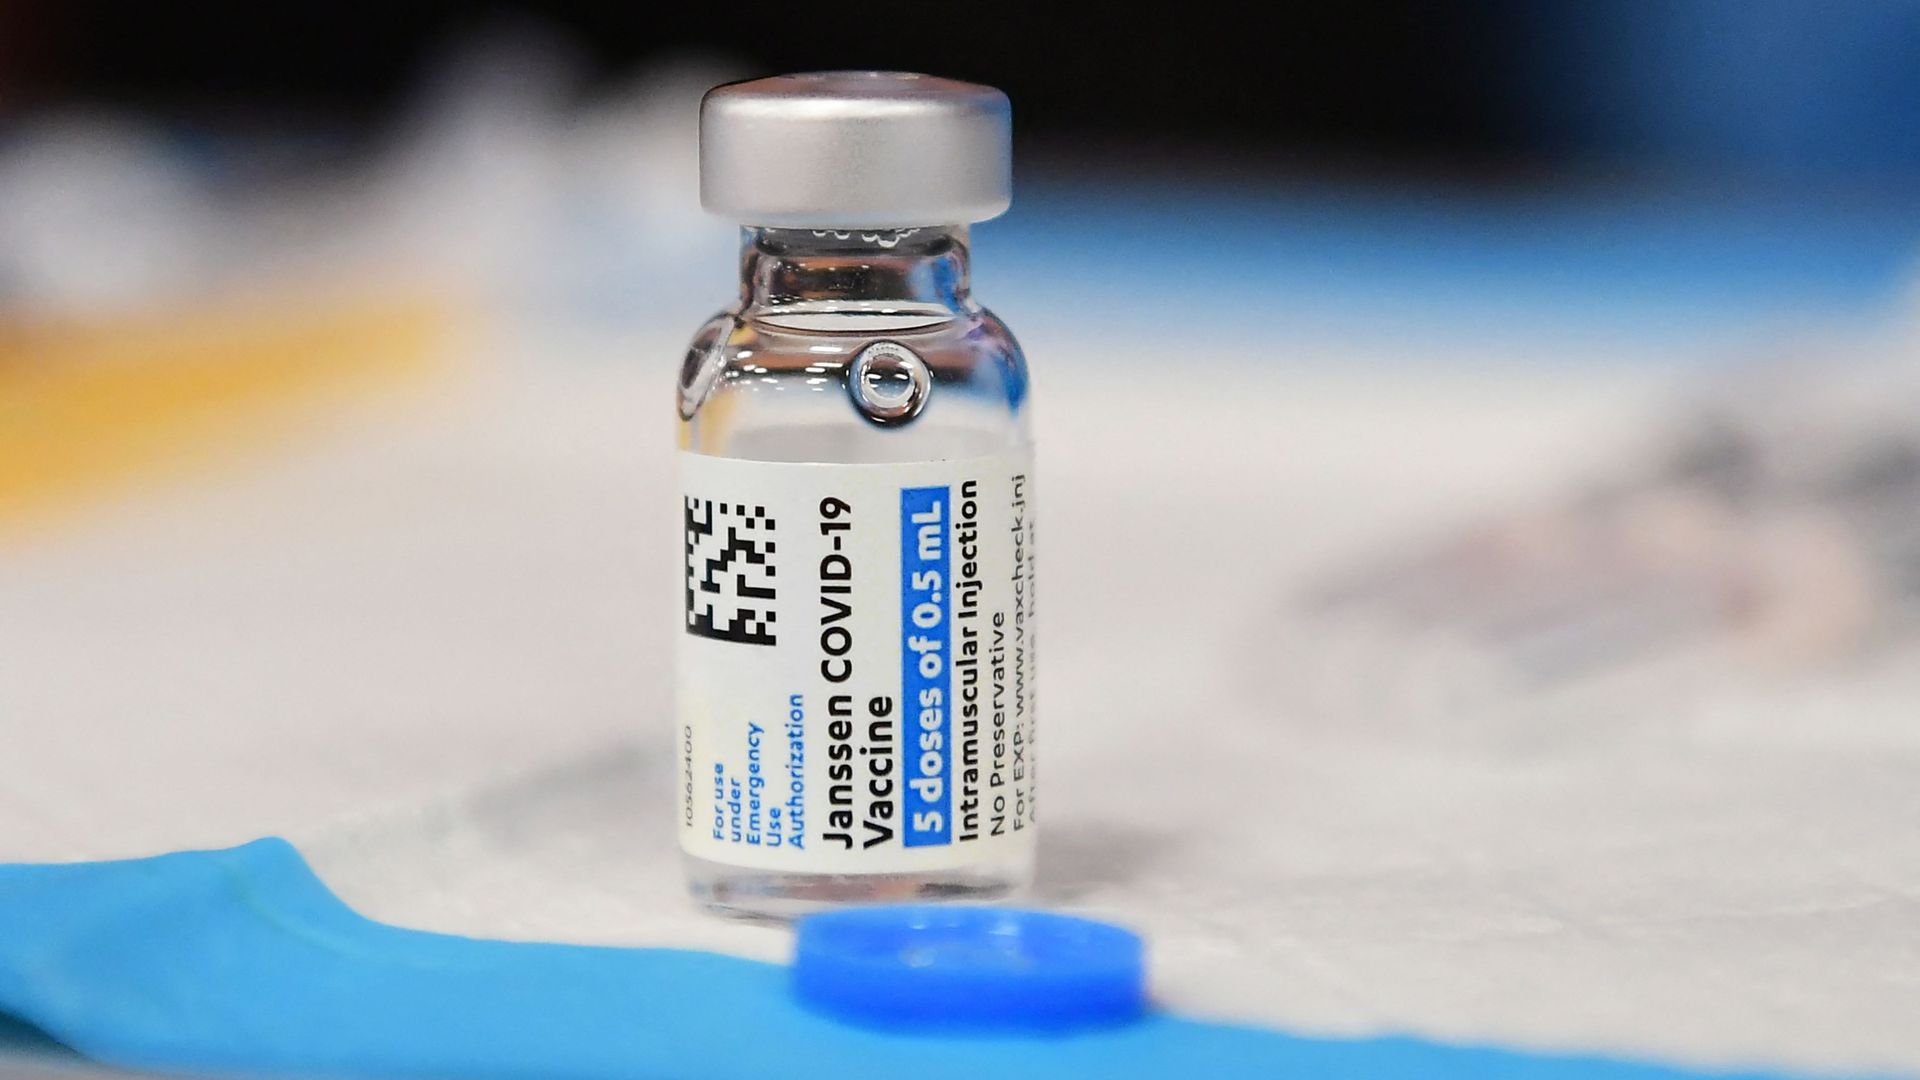 Johnson & Johnson's Janssen Covid-19 vaccine awaits administration at a vaccination clinic in Los Angeles, California.